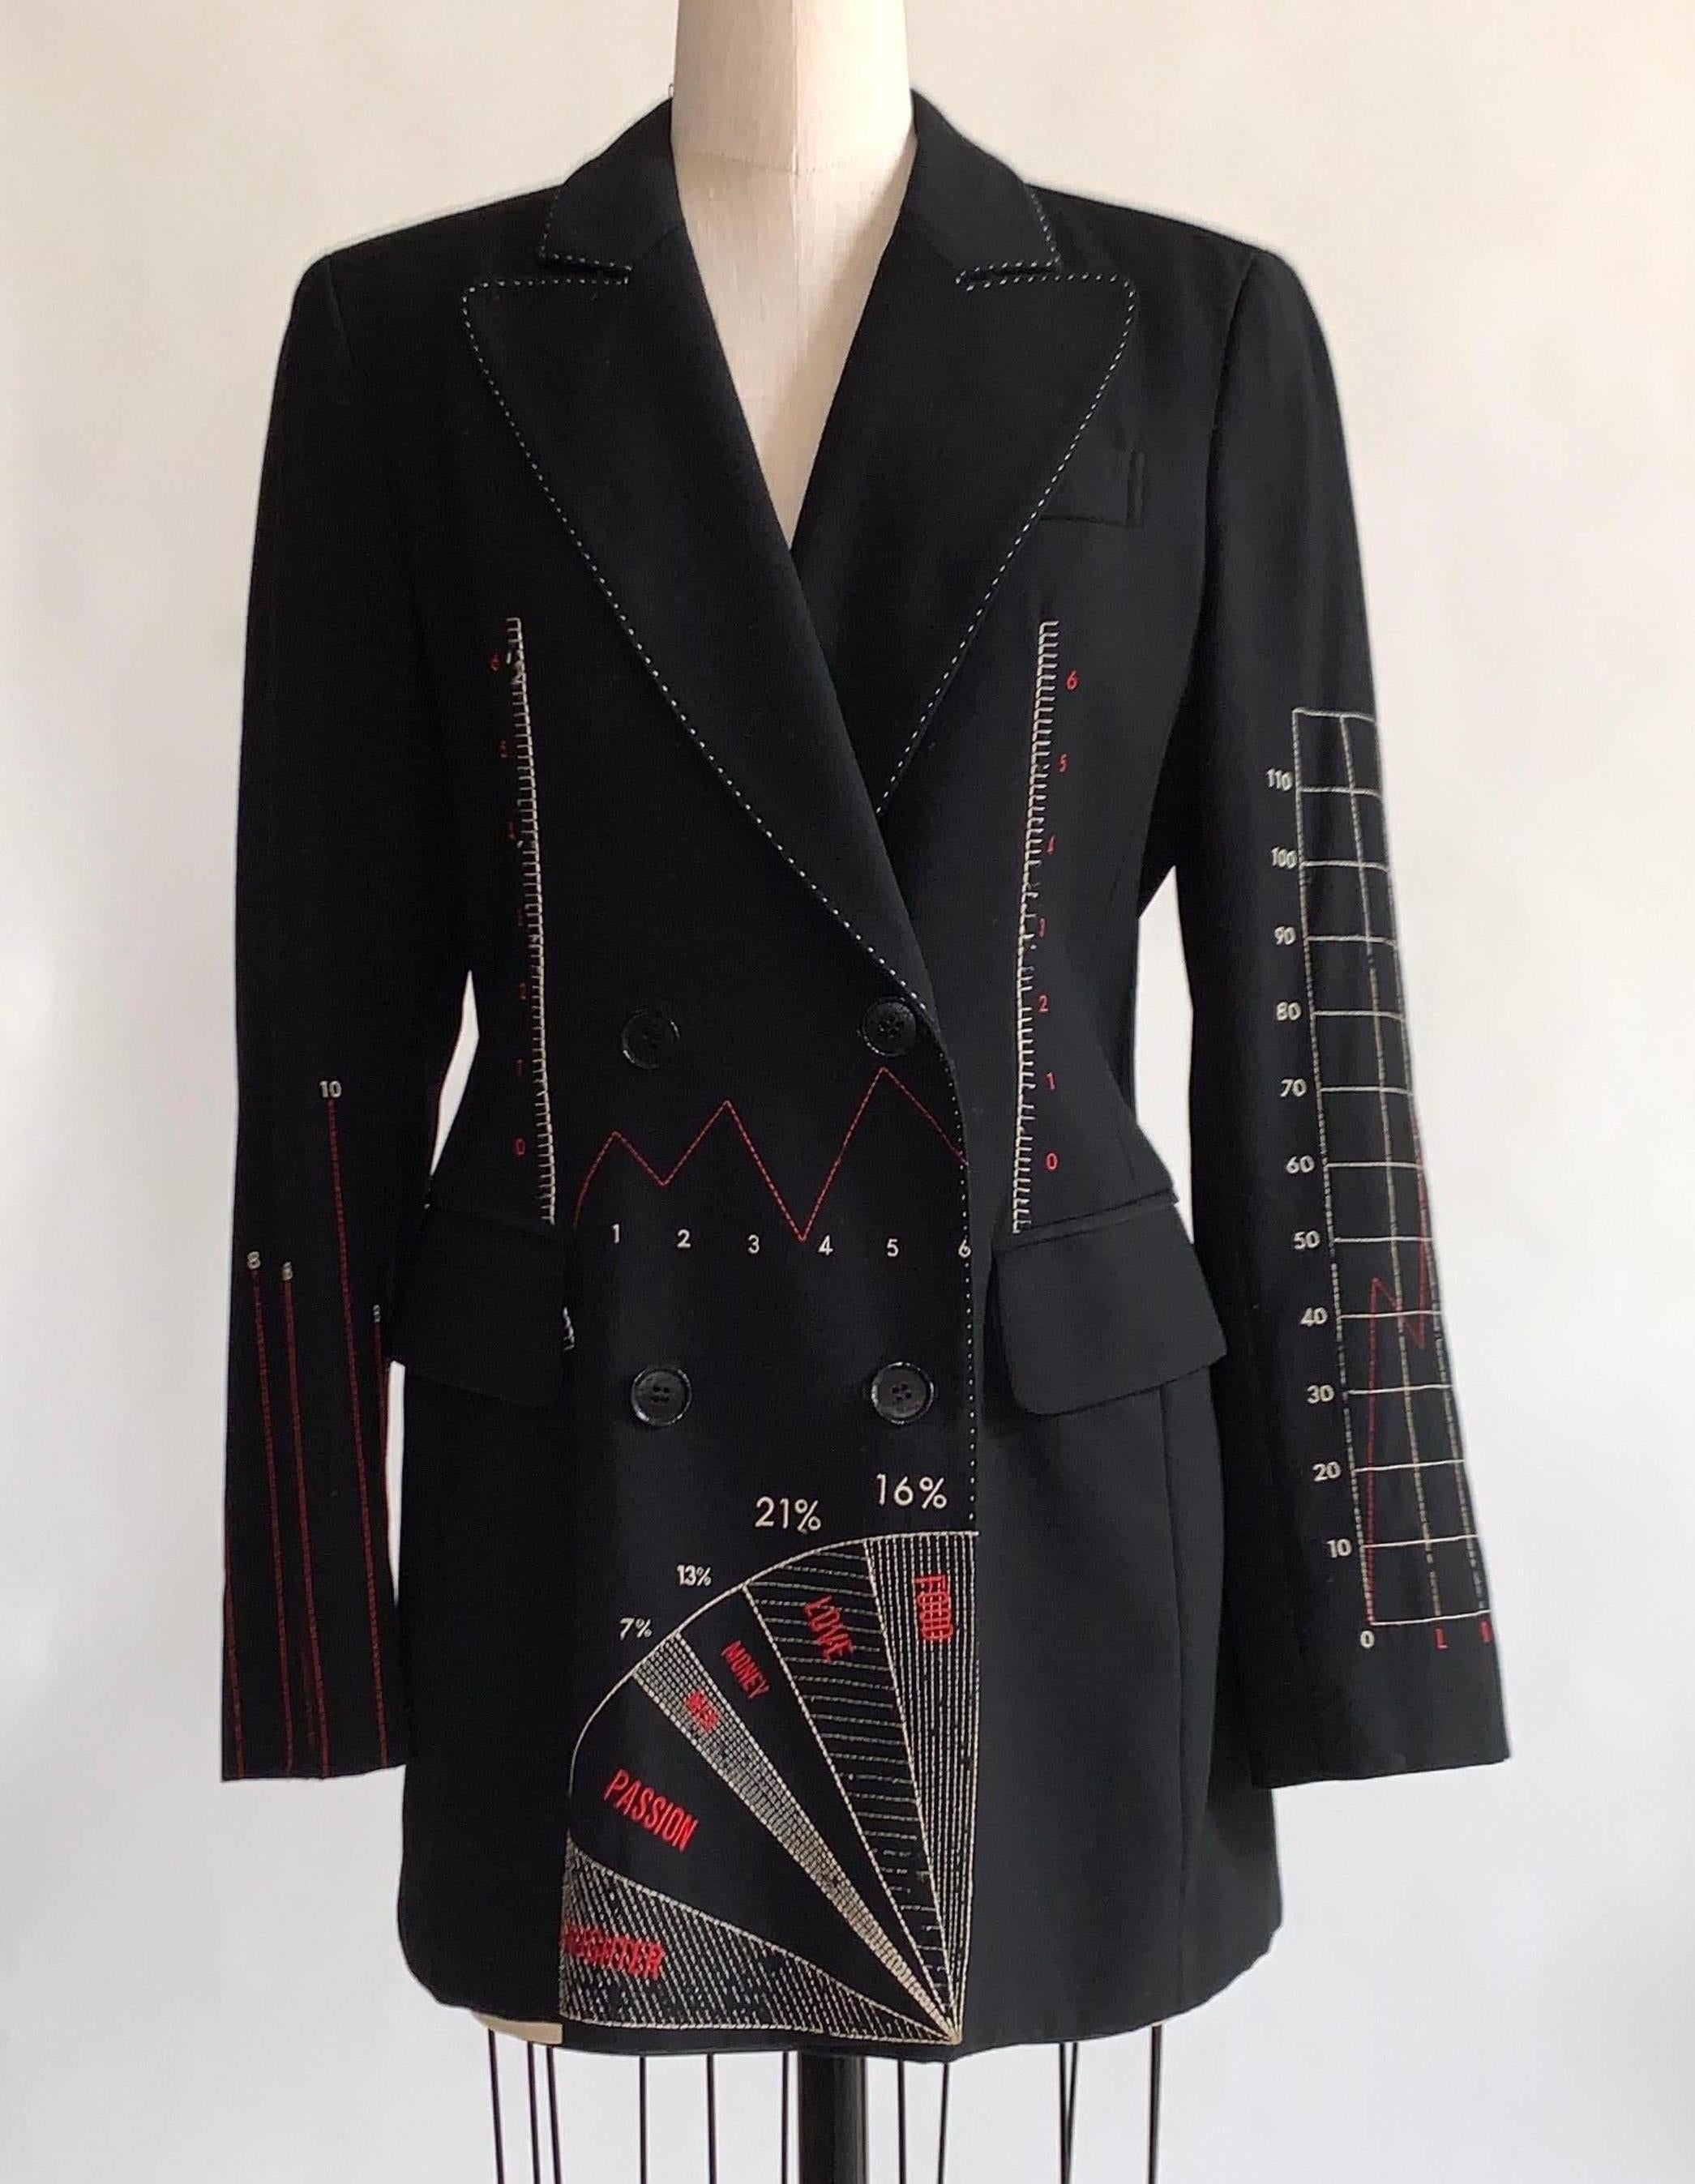 Moschino Cheap & Chic 1990s charts & graphs of love black double breasted blazer with red and white chart and graph embroidery from the 'You Can't Judge a Girl By Her Clothes' collection. Buttons at front with black plastic buttons with small